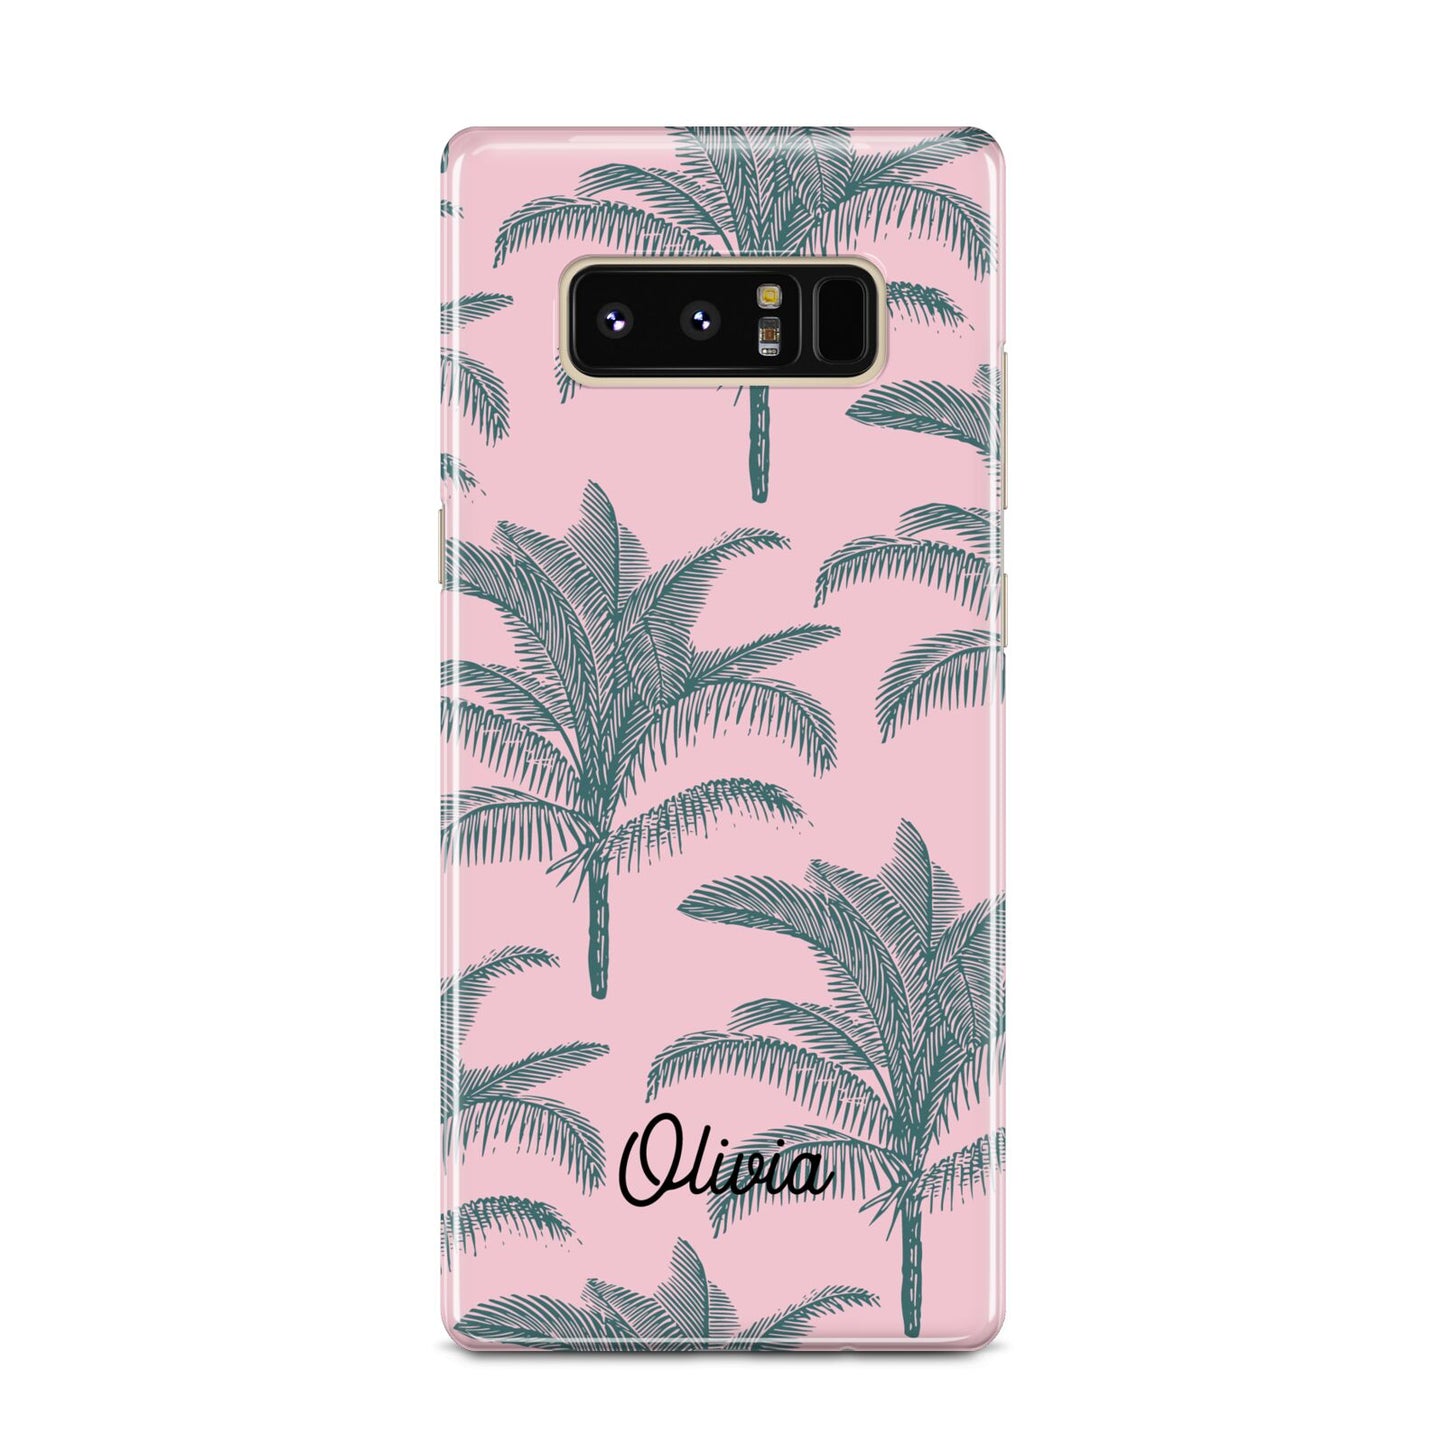 Personalised Palm Samsung Galaxy Note 8 Case